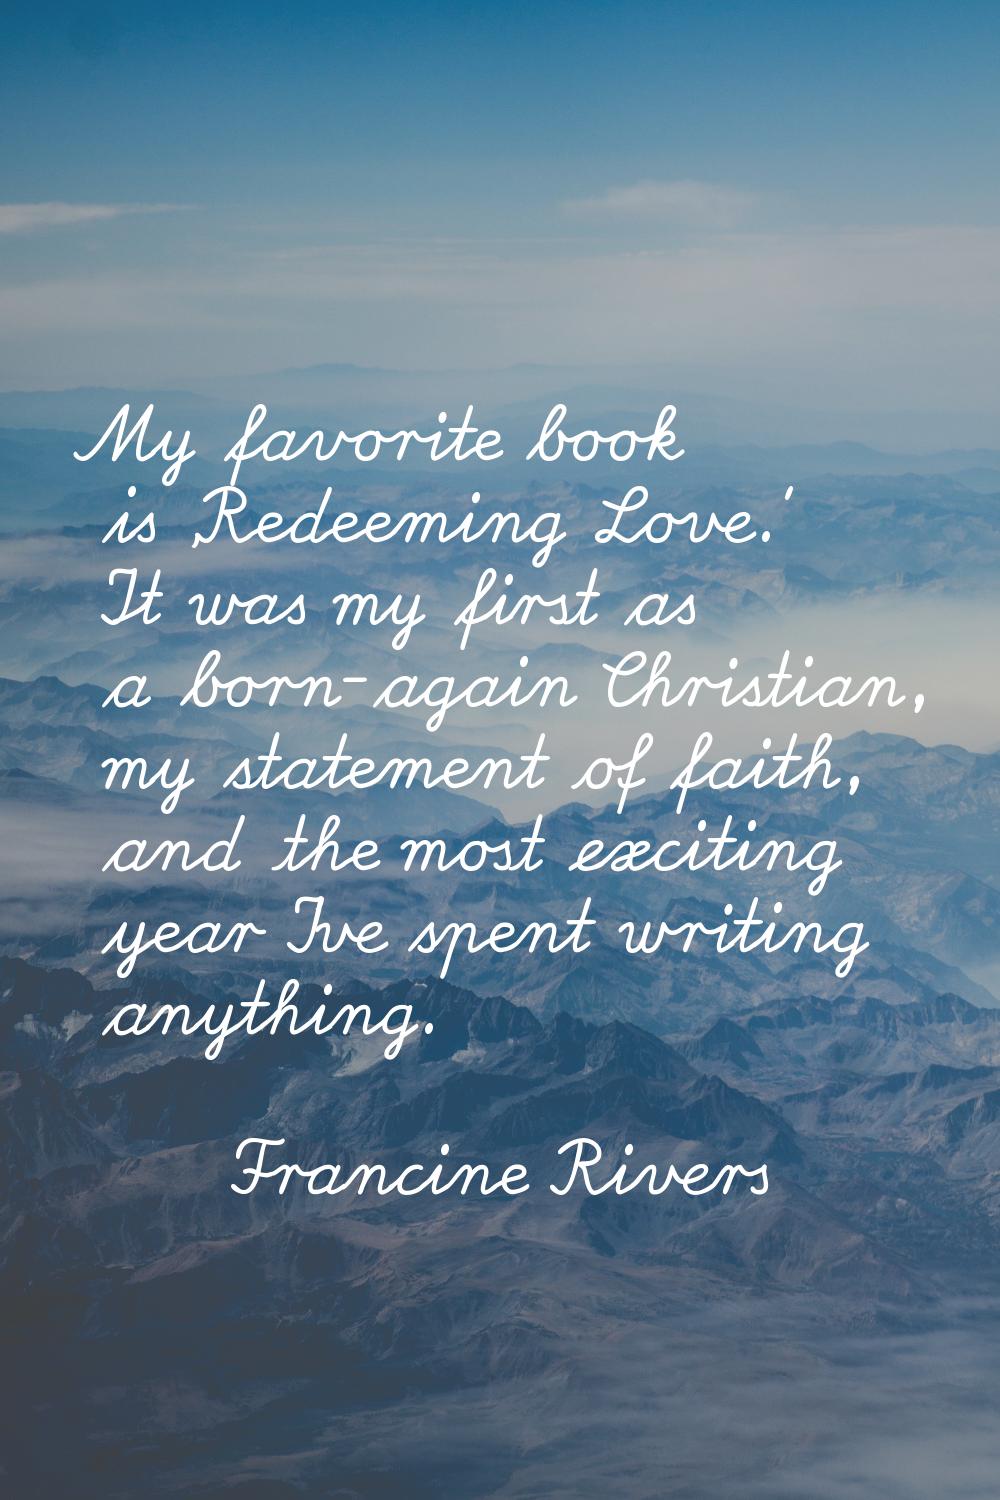 My favorite book is 'Redeeming Love.' It was my first as a born-again Christian, my statement of fa